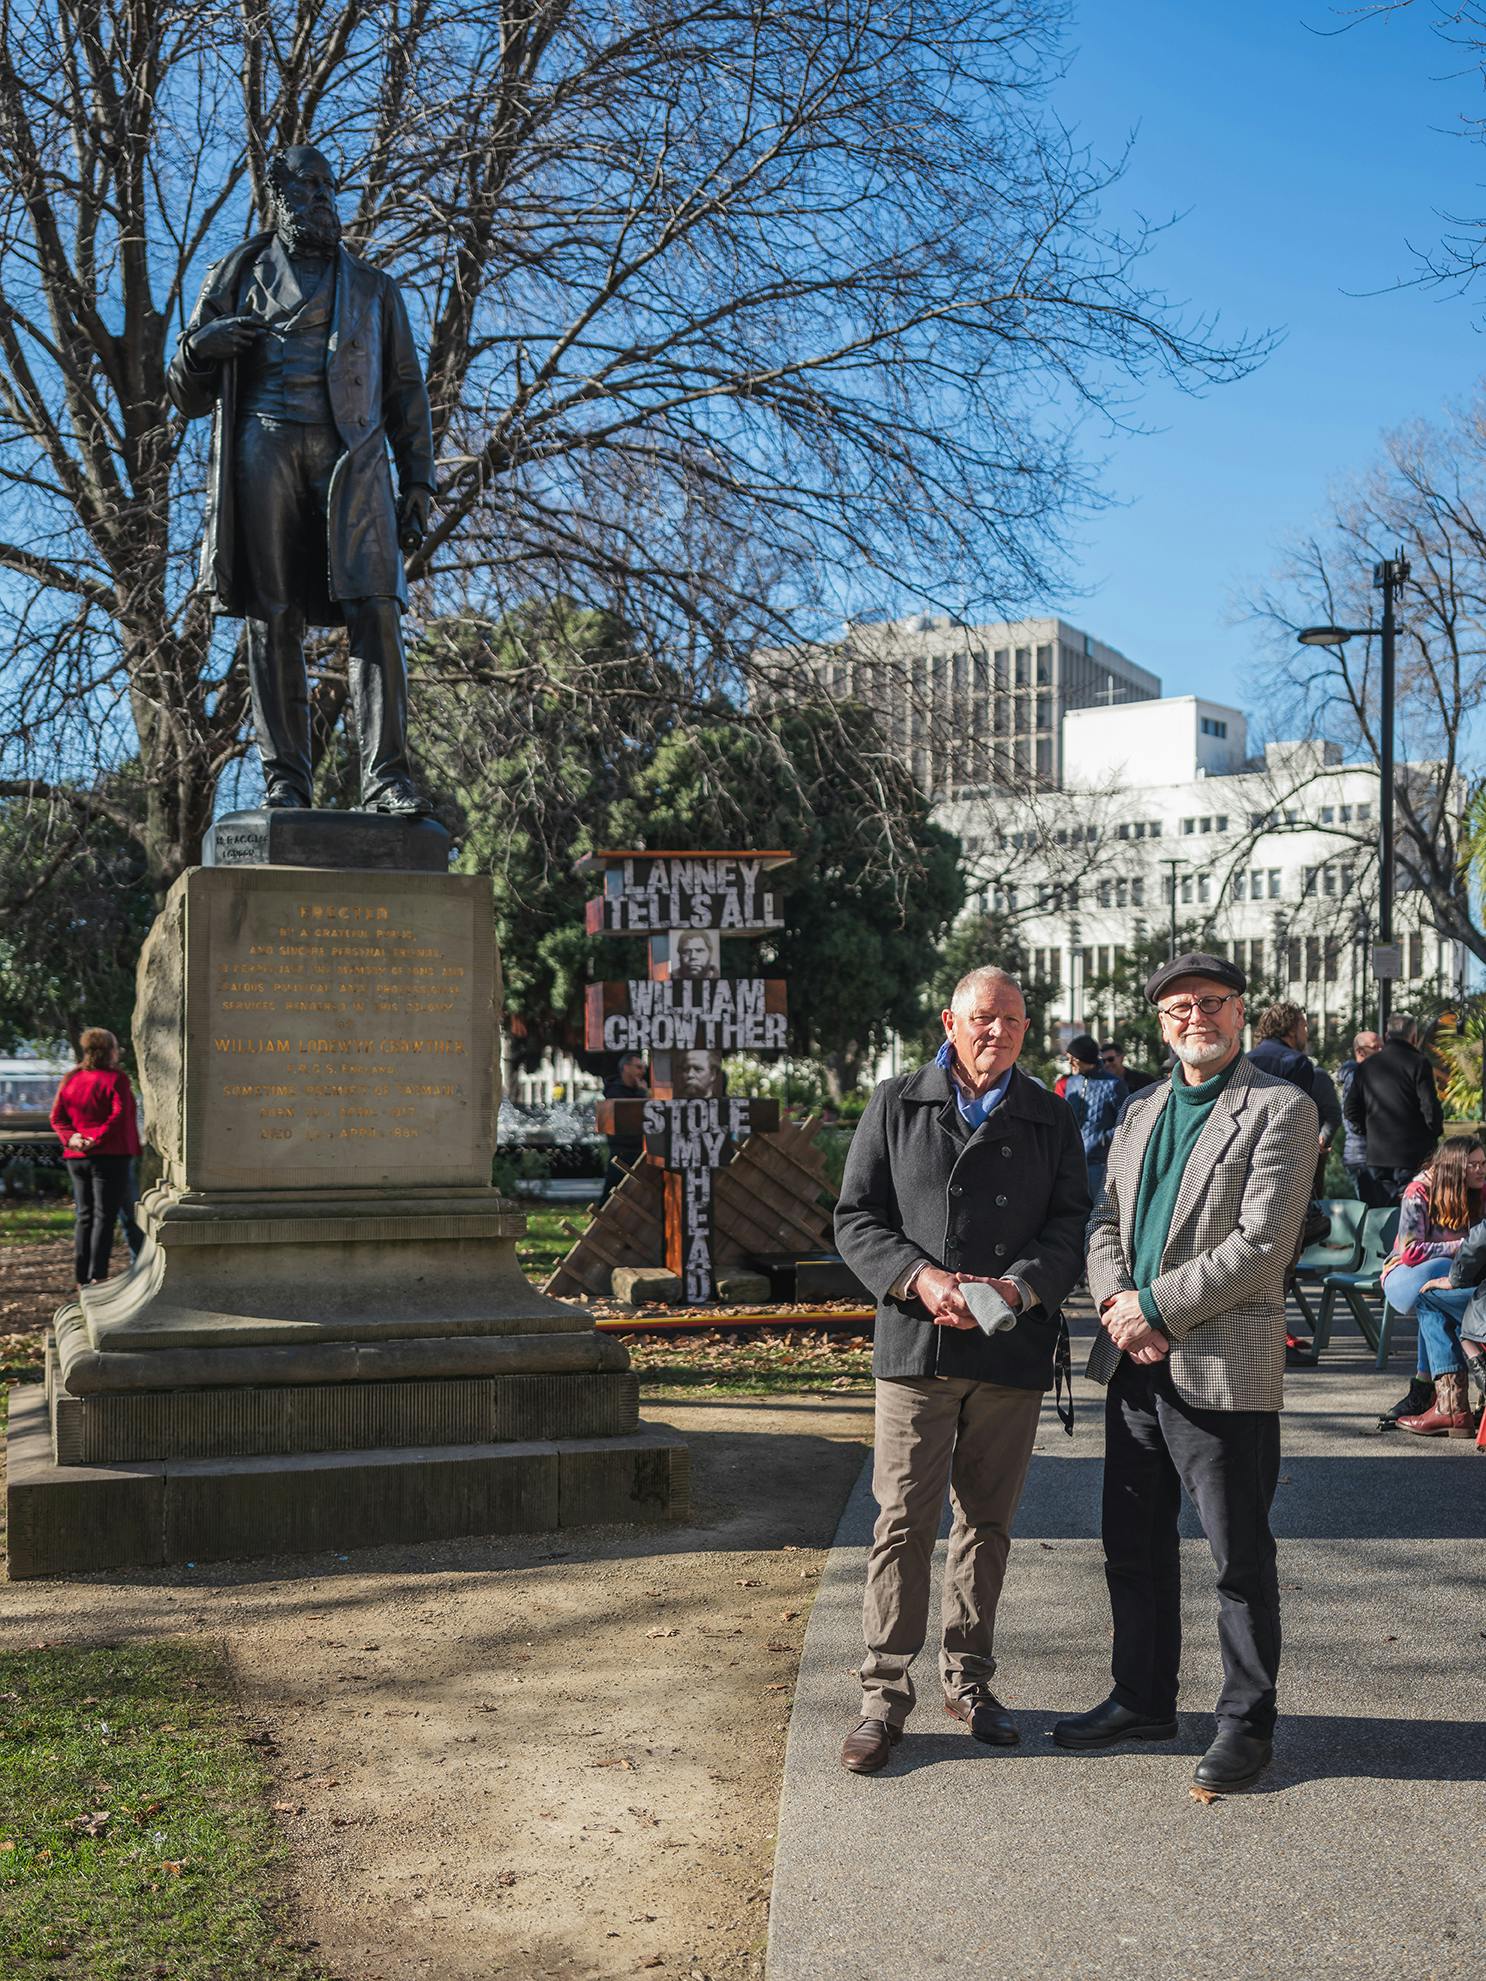 Artists Roger Scholes and Greg Lehman in front of their artwork The Lanney Pillar and the statue of William Crowther